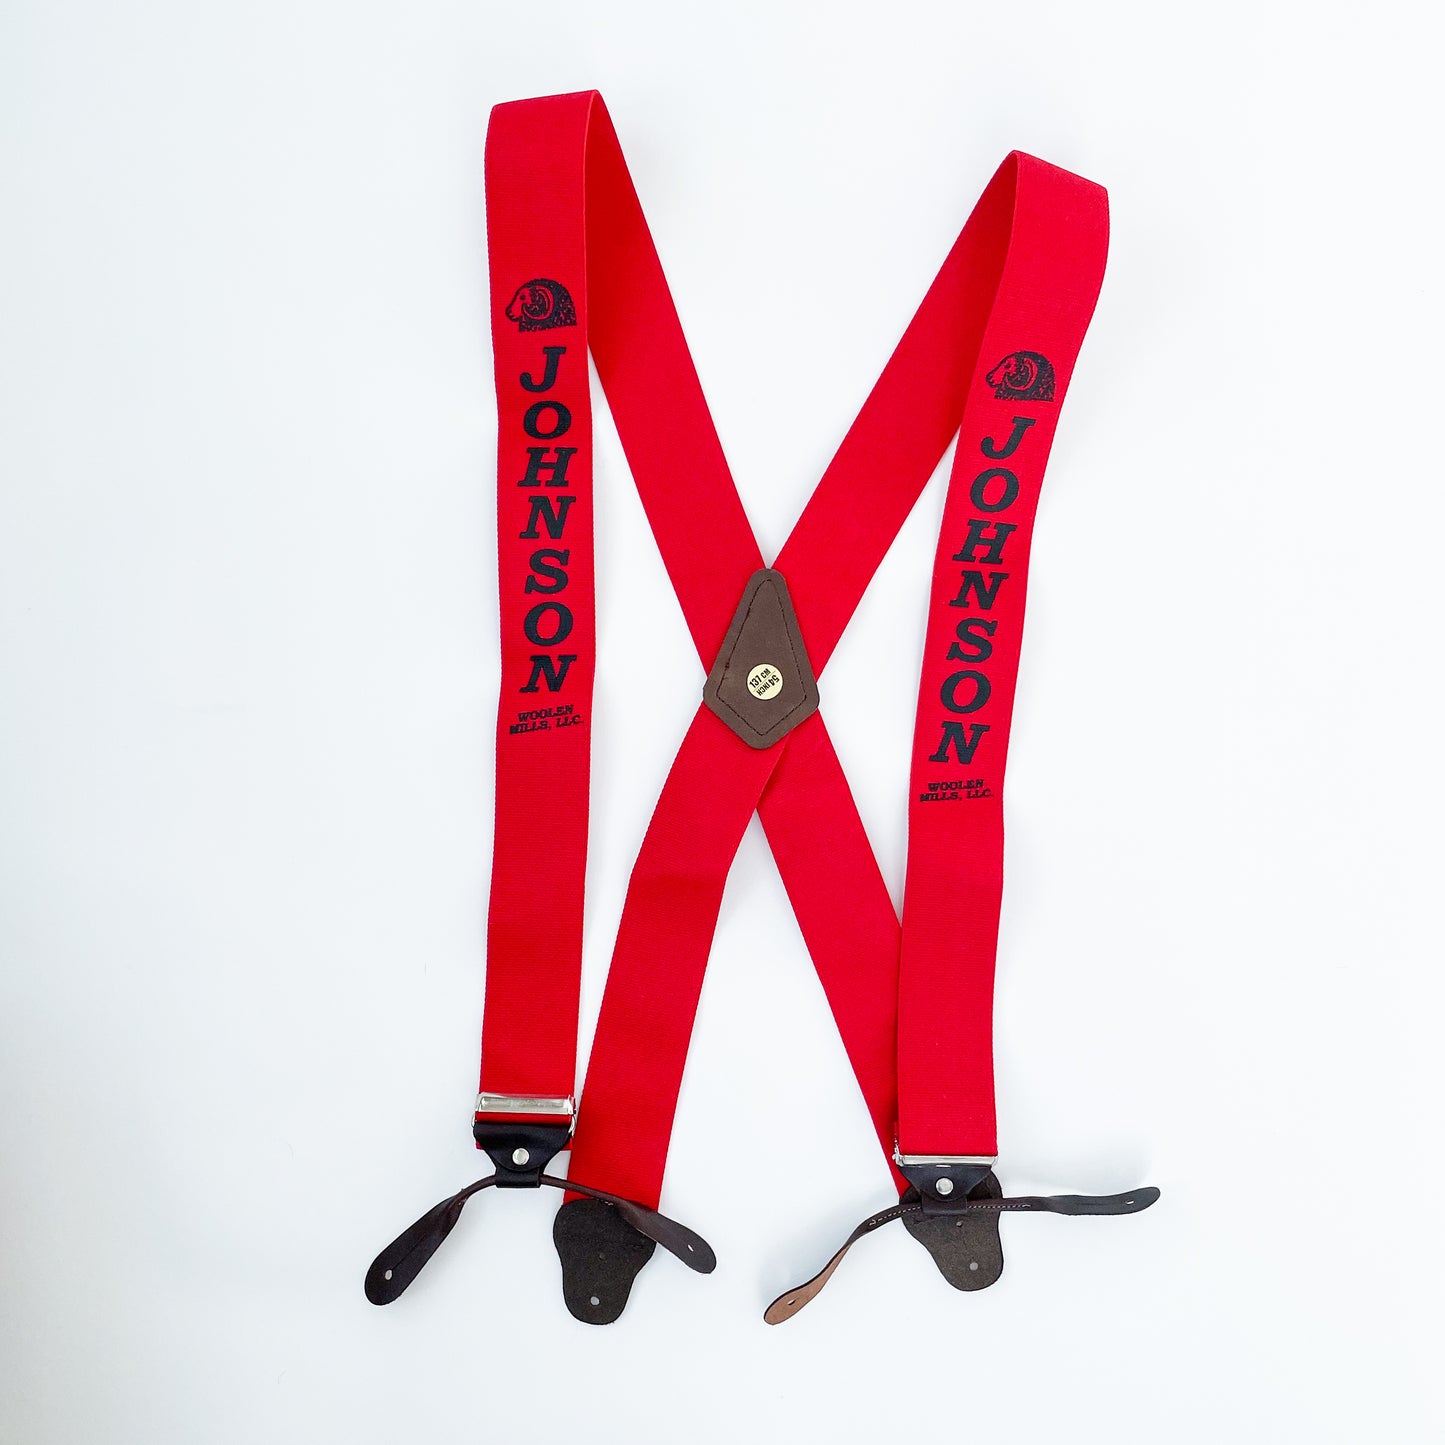 Johnson Woolen Mills red suspenders with black BUTTON clasps and JWM logo 